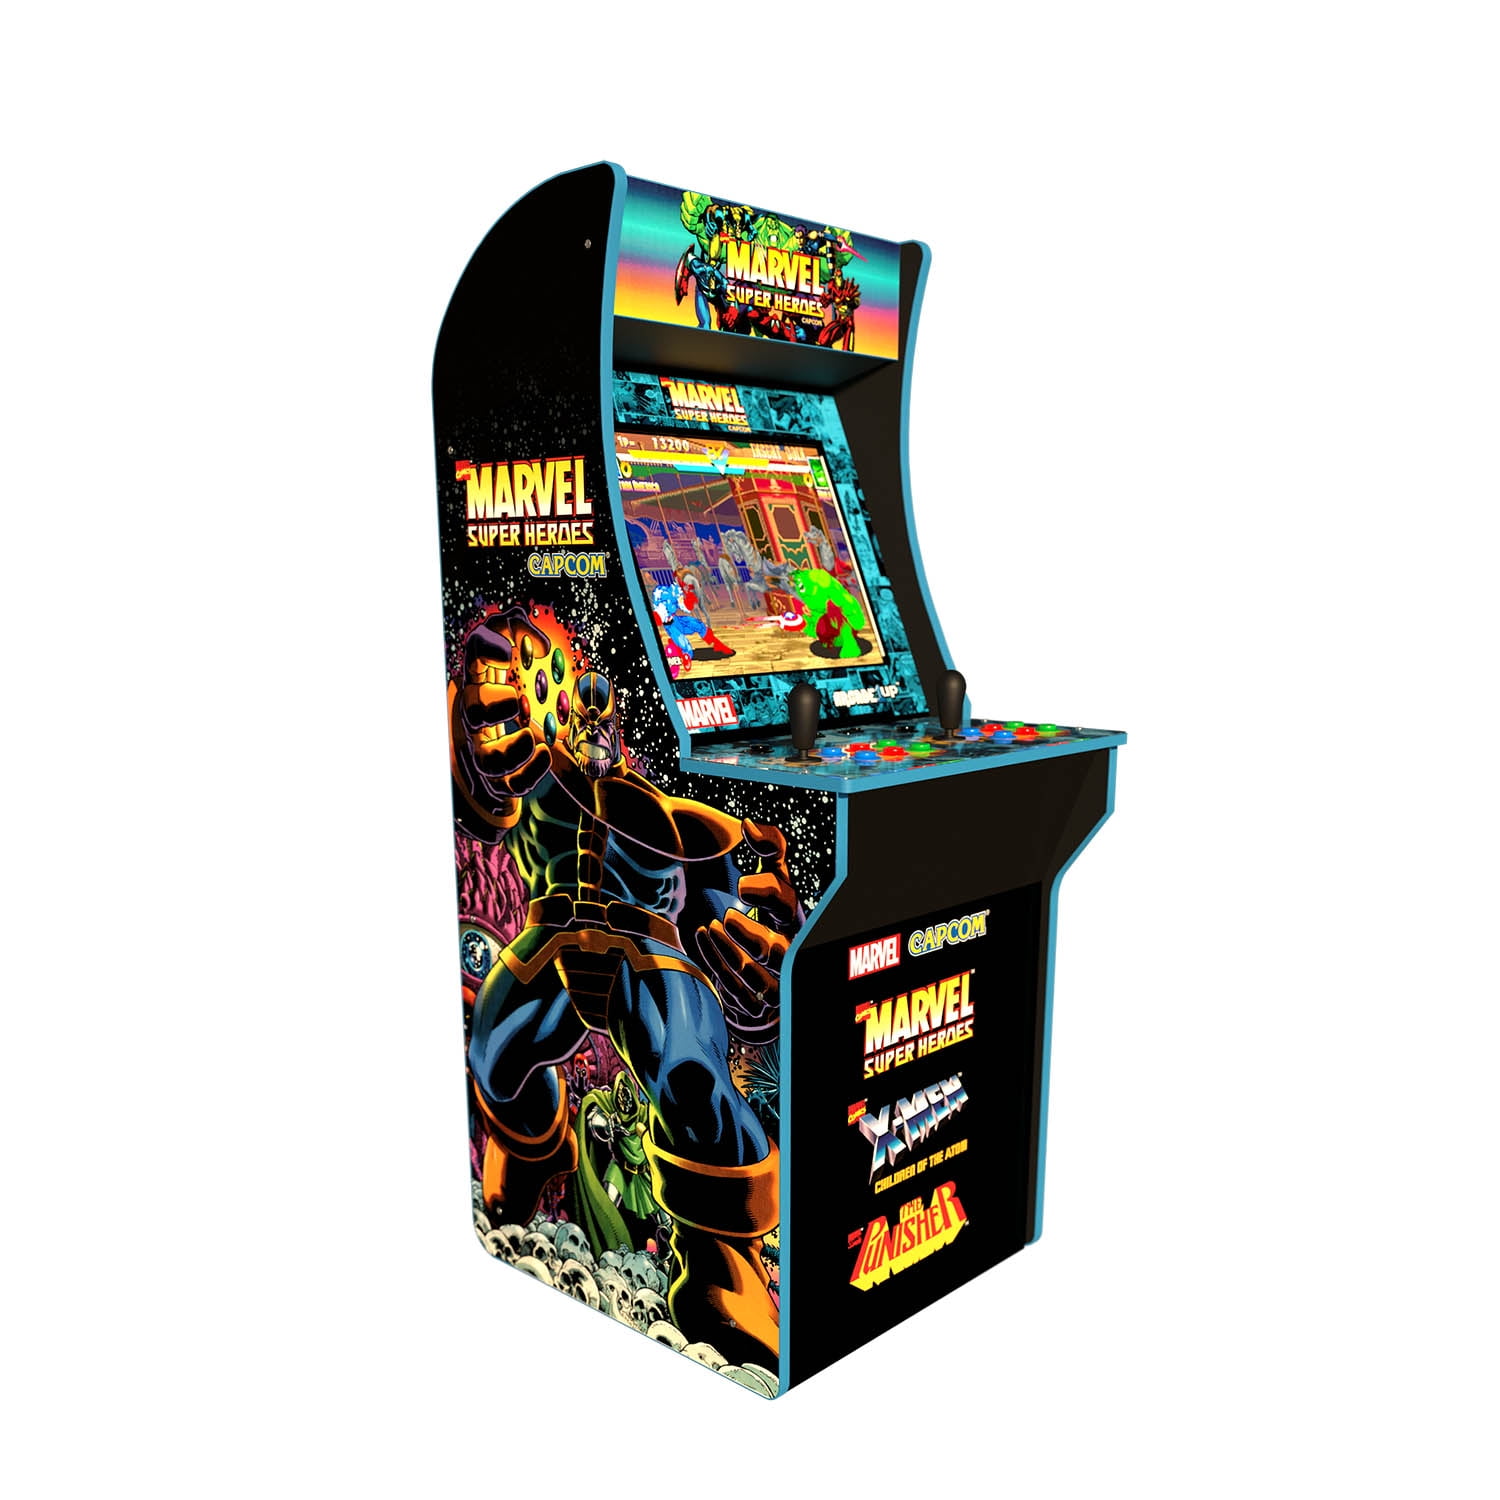 Marvel Super Heroes Side Art Arcade Panels Cabinet Graphics Stickers 